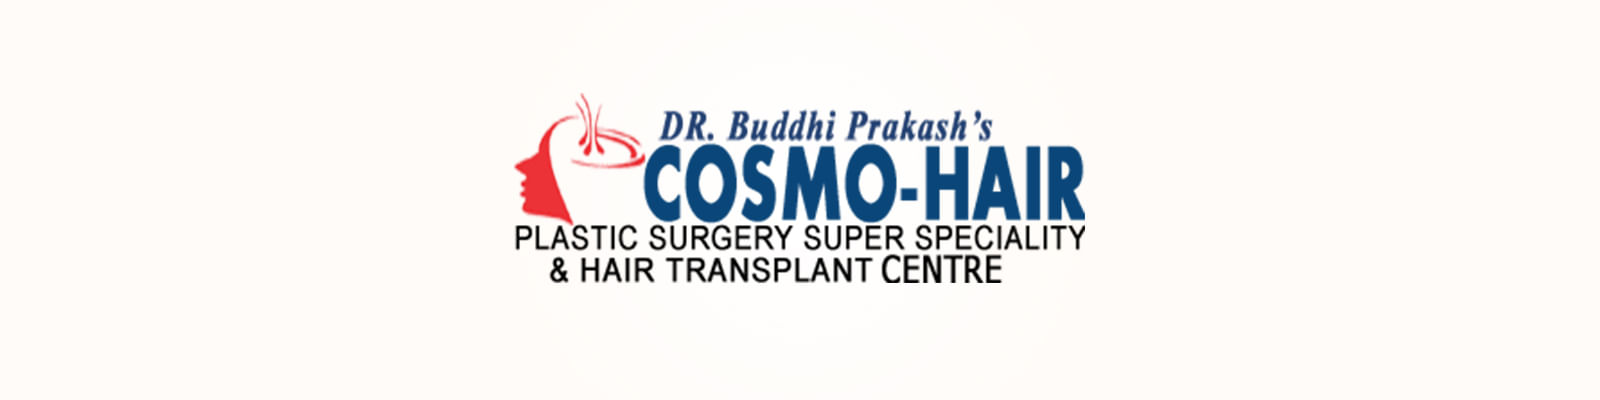 Cosmo-Hair (Advance Centre For Hair Transplant & Plastic Surgery )